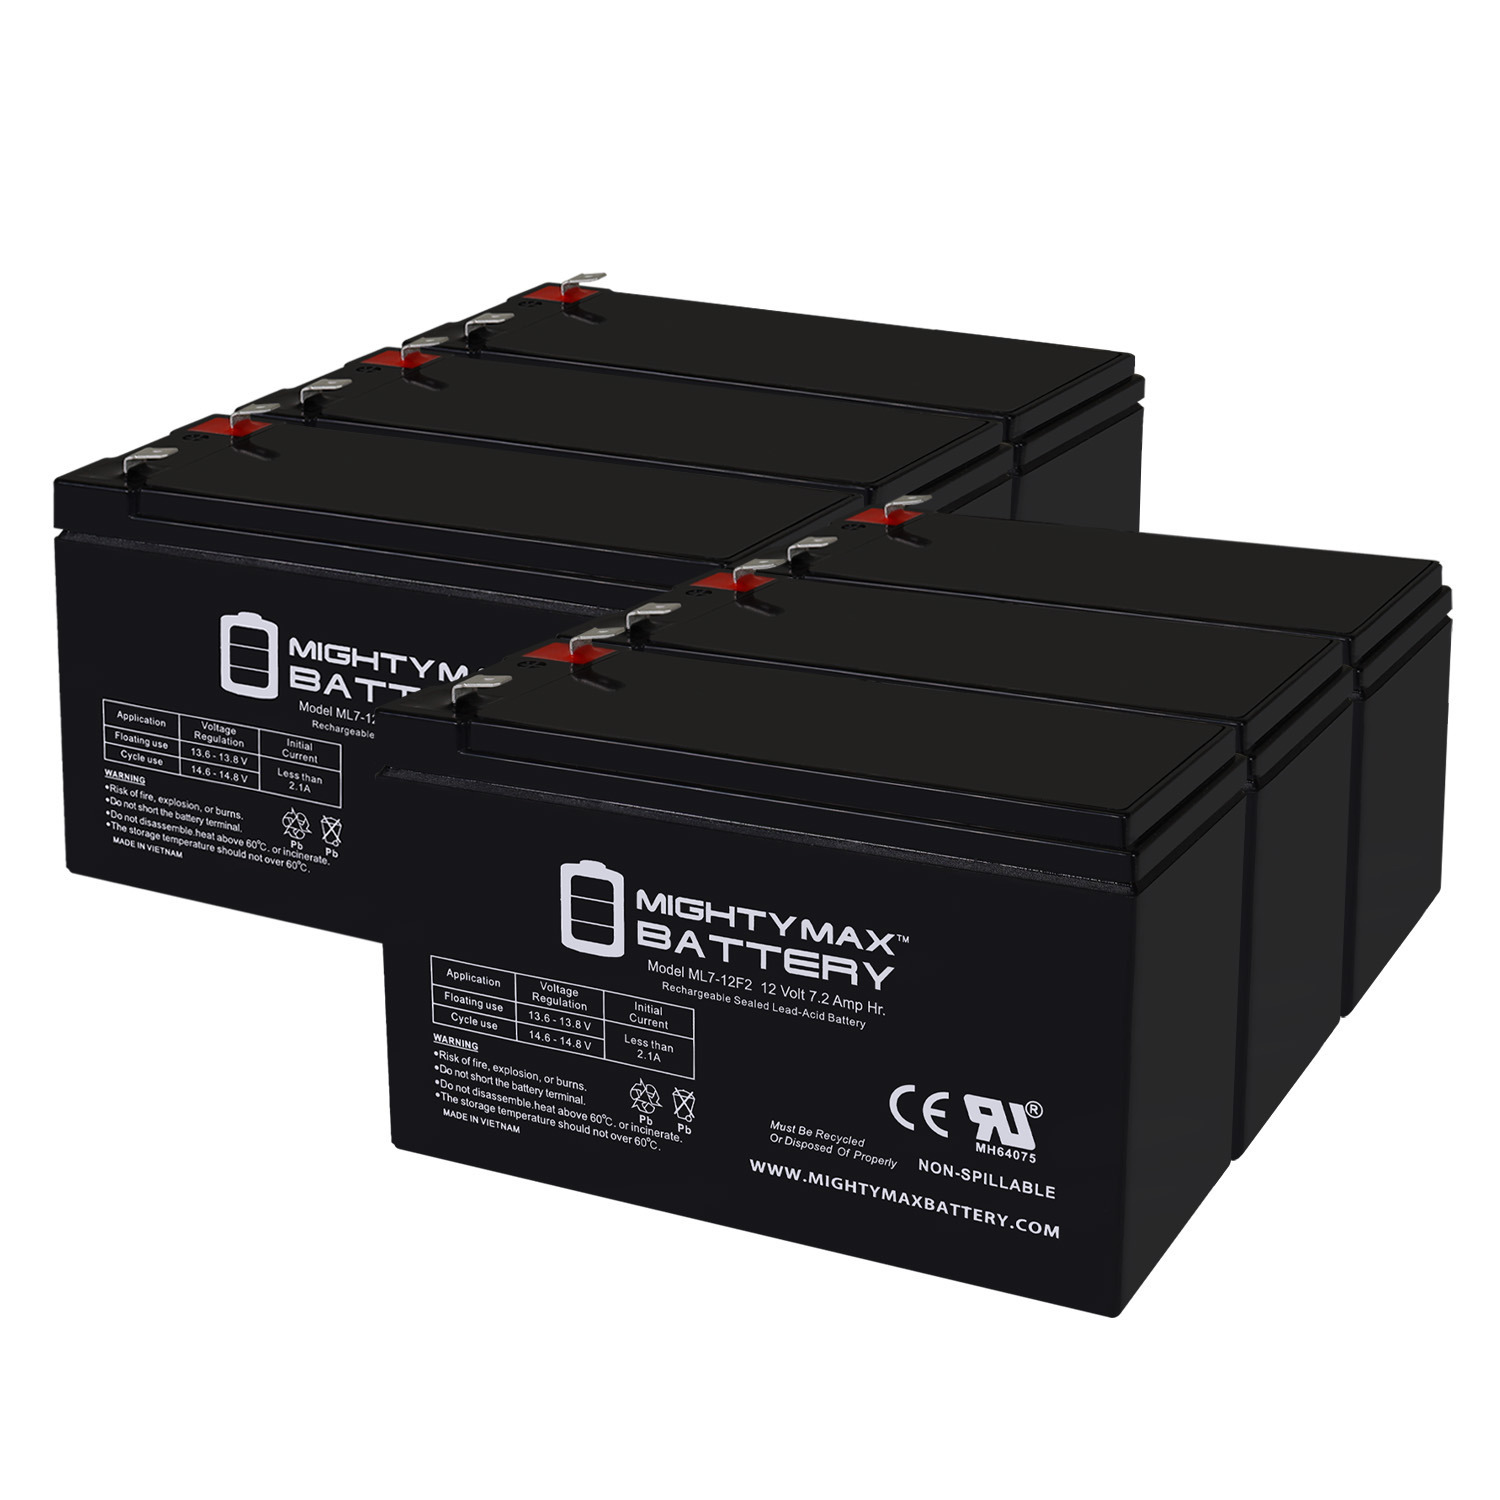 12V 7Ah F2 Replacement Battery for Zeus PC9-12SF2 - 6 Pack